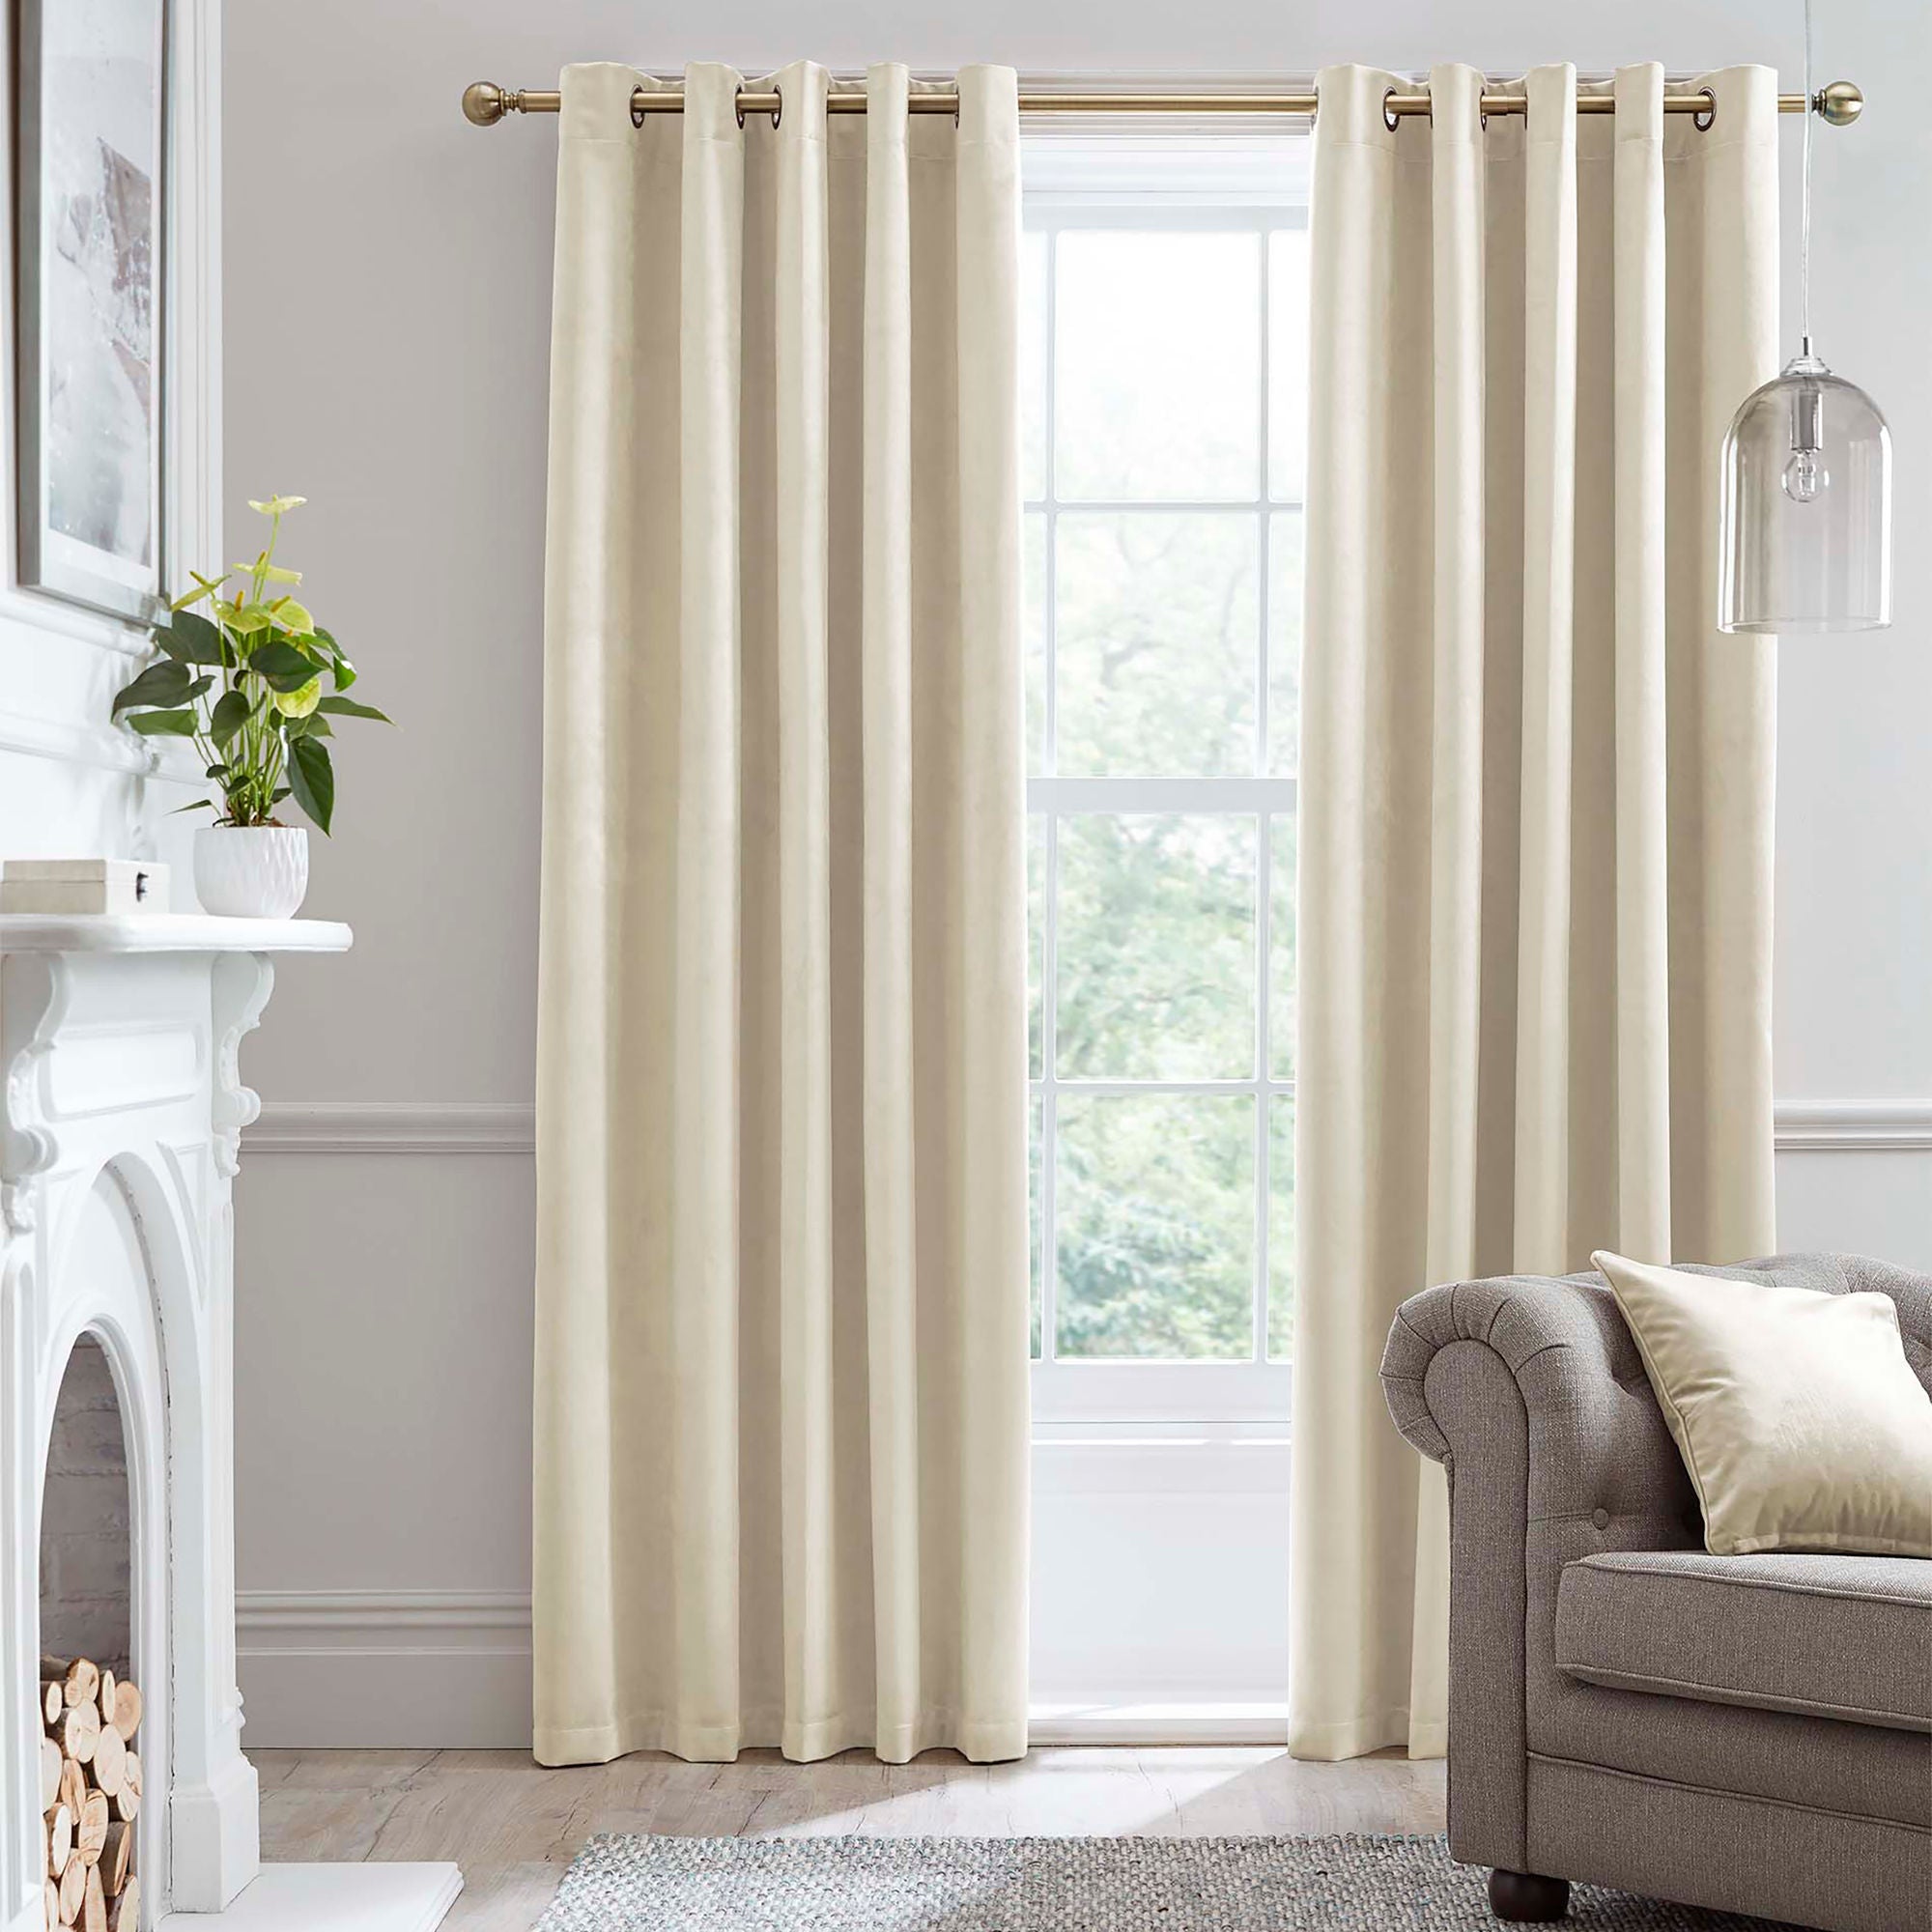 Montrose Pair of Eyelet Curtains by Laurence Llewelyn-Bowen in Ivory - Pair of Eyelet Curtains - Laurence Llewelyn-Bowen